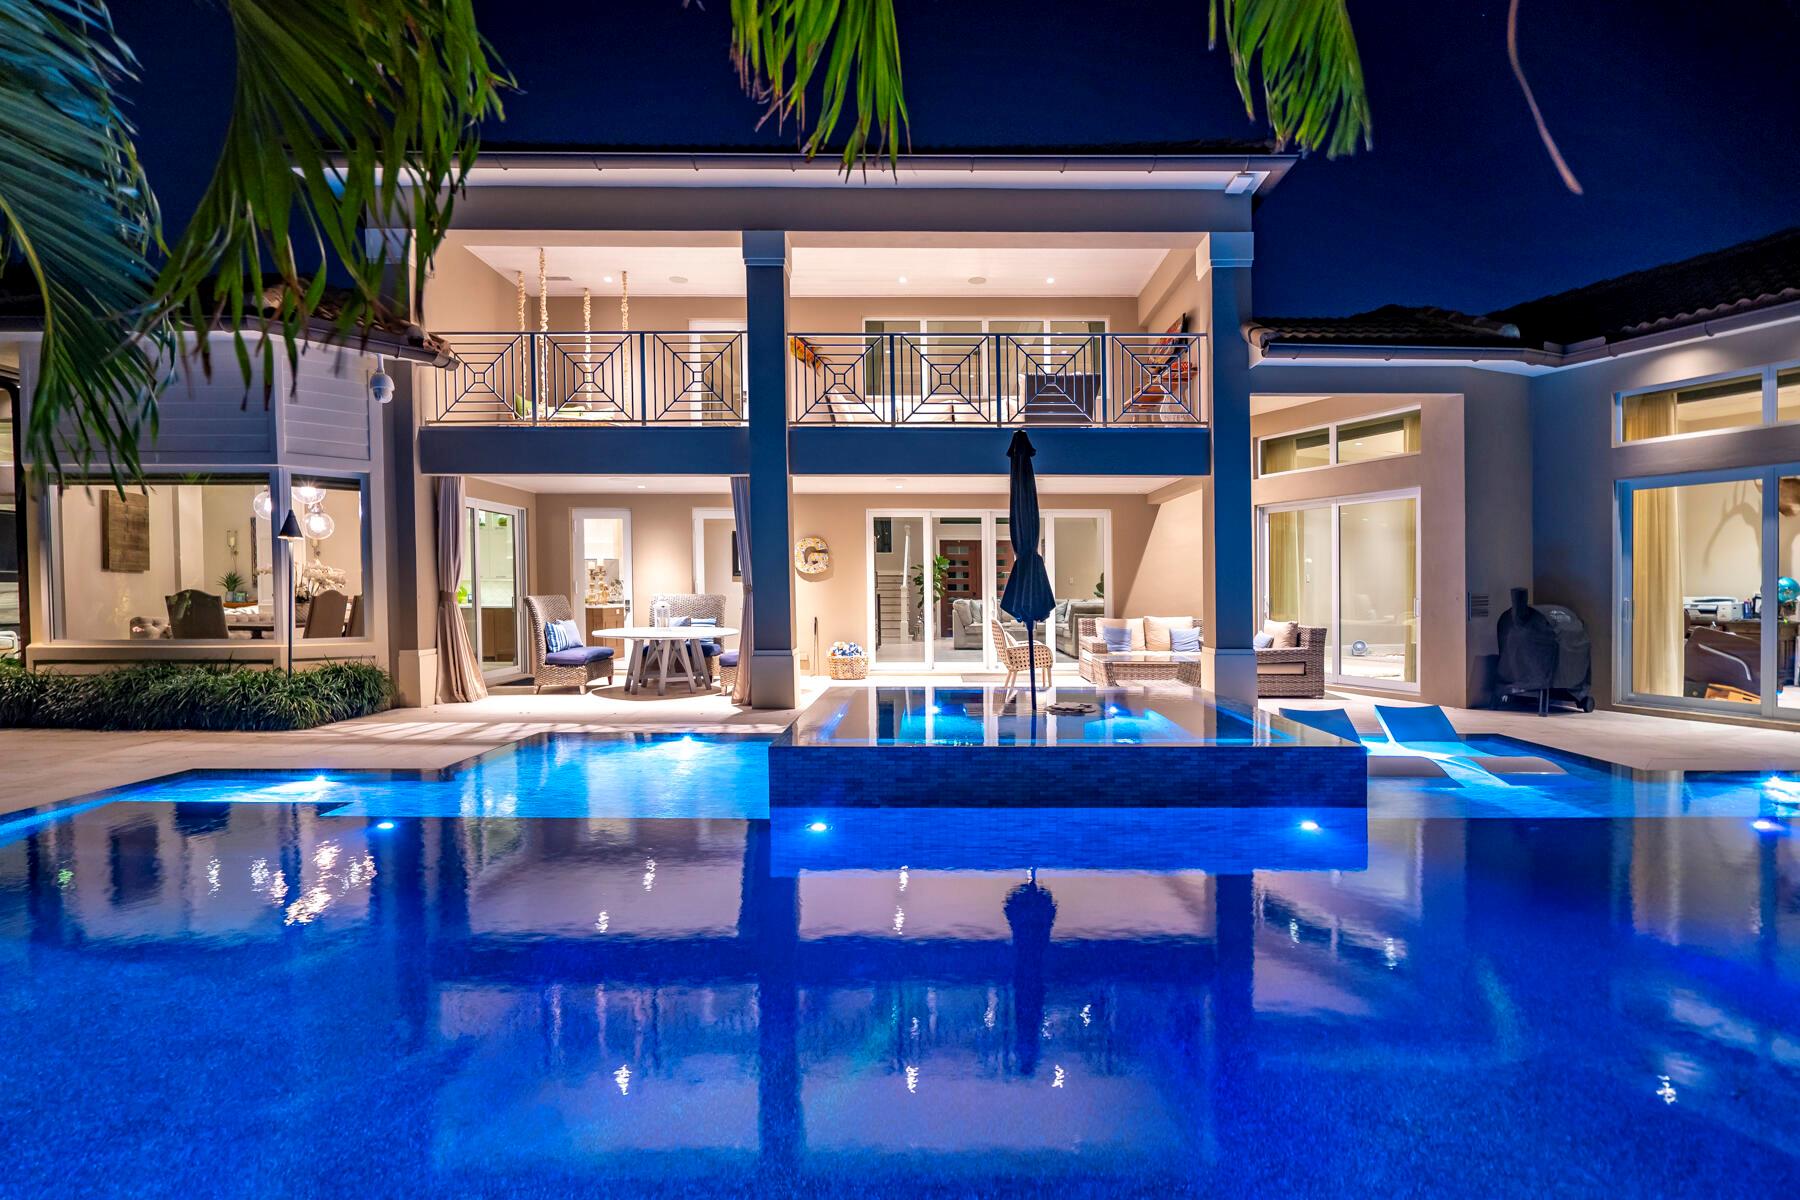 Experience unmatched elegance and modern sophistication at this waterfront estate fully renovated in 2019. This property epitomizes luxury living, offering a seamless blend of comfort, quality, and beauty. Positioned in an esteemed locale, it promises an exceptional lifestyle with stunning views and direct access to the water. Nestled in the sought-after Yacht Harbor Manor, Singer Island is renowned for its pristine beaches, lifestyle, and close proximity to diverse dining, shopping, and entertainment venues. This home stands as a beacon of unparalleled living in one of Florida's most prestigious communities. The residence welcomes you with a spacious design that includes 4 bedrooms and 4.5 bathrooms, all with copper plumbing throughout the home.  Each space is meticulously crafted, featuring Trimless AC grills, Trimless recessed High Hats, a Chandelier lift and strategically placed outlets in the baseboards for a sleek look.  The warmth and elegance of hardwood bamboo flooring flow throughout the home, enhancing the inviting ambiance.

Kitchen: Designed for the culinary enthusiast, the kitchen is equipped with Downsview cabinets, commercial-grade gas Wolf double ovens, high-end appliances, a water softener, and a generous walk-in pantry, setting the stage for gourmet creations and gatherings.

Smart Home Technology: The residence is outfitted with a cutting-edge Lutron electrical system and automated shades, alongside a high-grade security system, ensuring convenience and safety.

Boating: Offering 140 feet of prime waterfront and a new 120-foot dock with two boat lifts. The first is an elevator lift capable of holding 25,000 lbs as well as a 20,000 lbs lift, this estate is a nautical haven. It accommodates up to an 85-foot vessel, providing swift access to the intracoastal waterway and the Port of Palm Beach, all without the hindrance of fixed bridges.

Power Resilience: A robust 38k backup generator, equipped with a 400 amp ATS surge protector, ensuring comfort, security and continuous power if there ever is an outage.

Infinity Pool: The newly installed in-ground pool features an infinity edge and Coastal Source LED lighting, nestled within exotic landscaping for a secluded retreat. There is added extra safety with a sliding aluminum fence seperating the backyard and the dock. 

Tropical Landscaping: Lush tropical flora and a Coastal Source outdoor sound system envelop the property, crafting a peaceful, picturesque haven that enhances its waterfront charm.

1140 Powell Drive transcends the typical home, offering a lifestyle steeped in luxury, with its extensive renovations, premium amenities, and exceptional waterfront position. It's a place where every detail caters to your utmost comfort and desire, whether you're luxuriating indoors, embracing the aquatic lifestyle, or hosting in grand style.